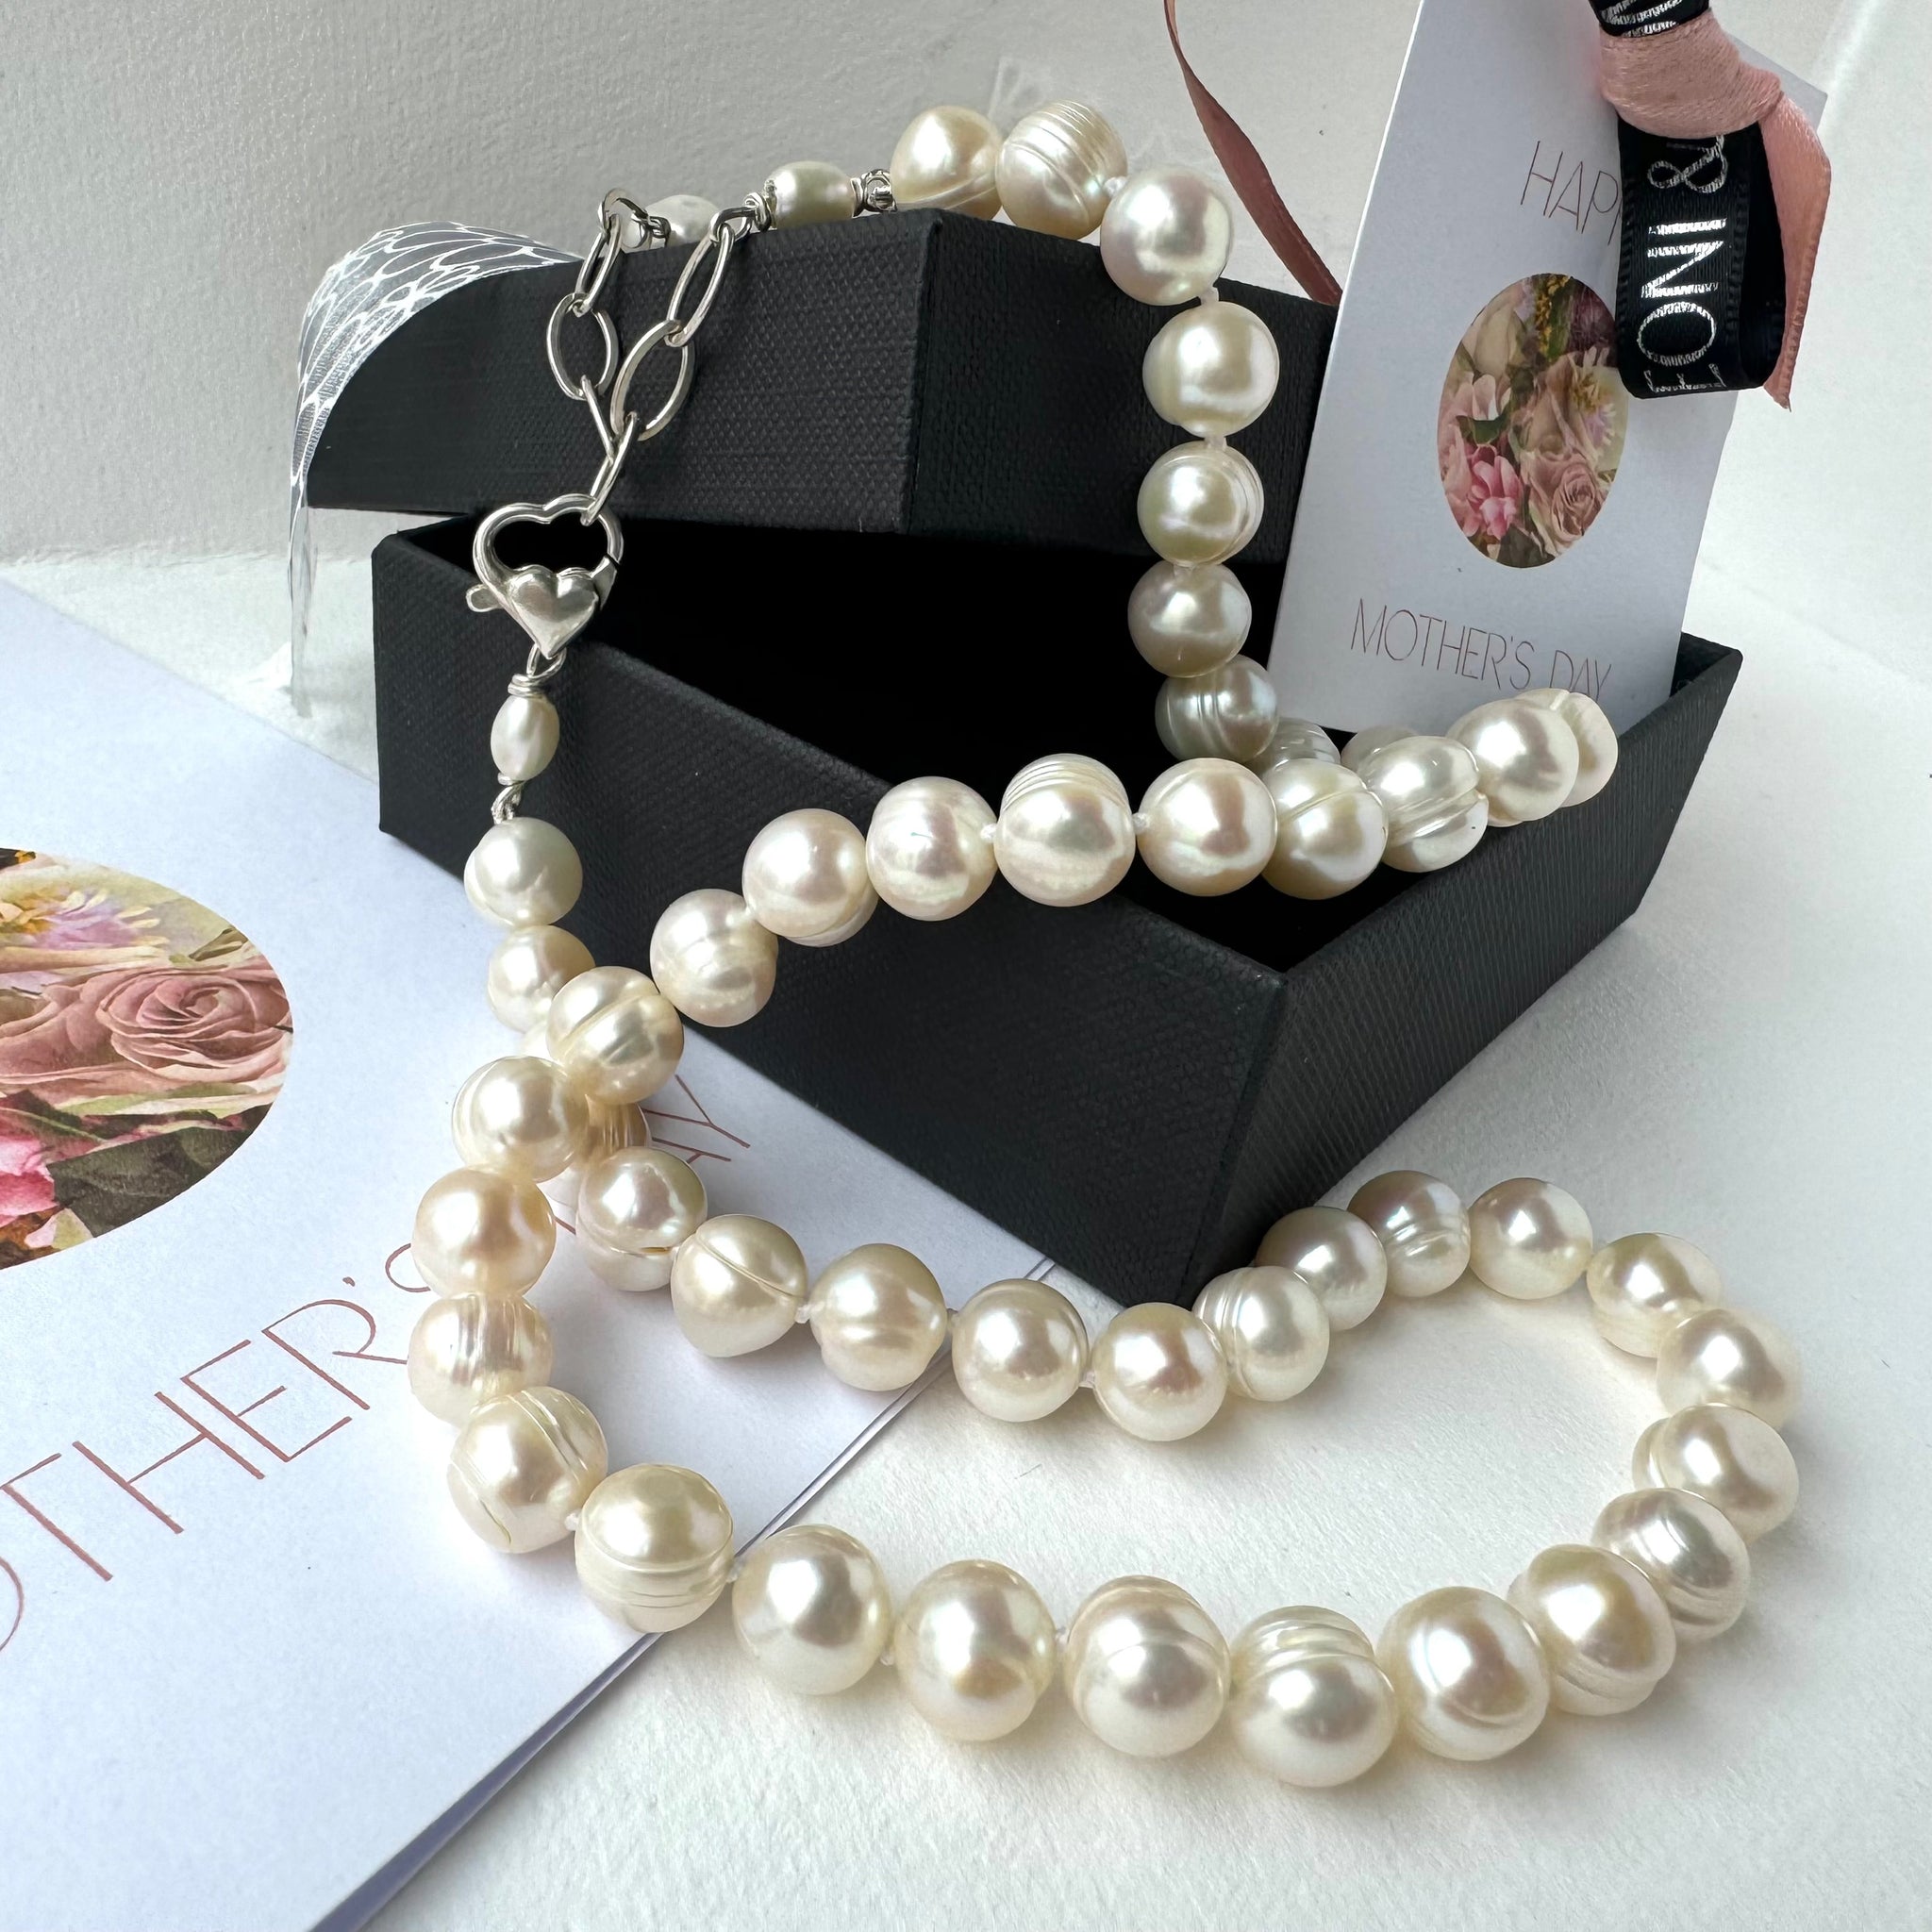 Leoni & Vonk pearl necklace for Mother's Day on a black box and with Leoni & Vonk packaging